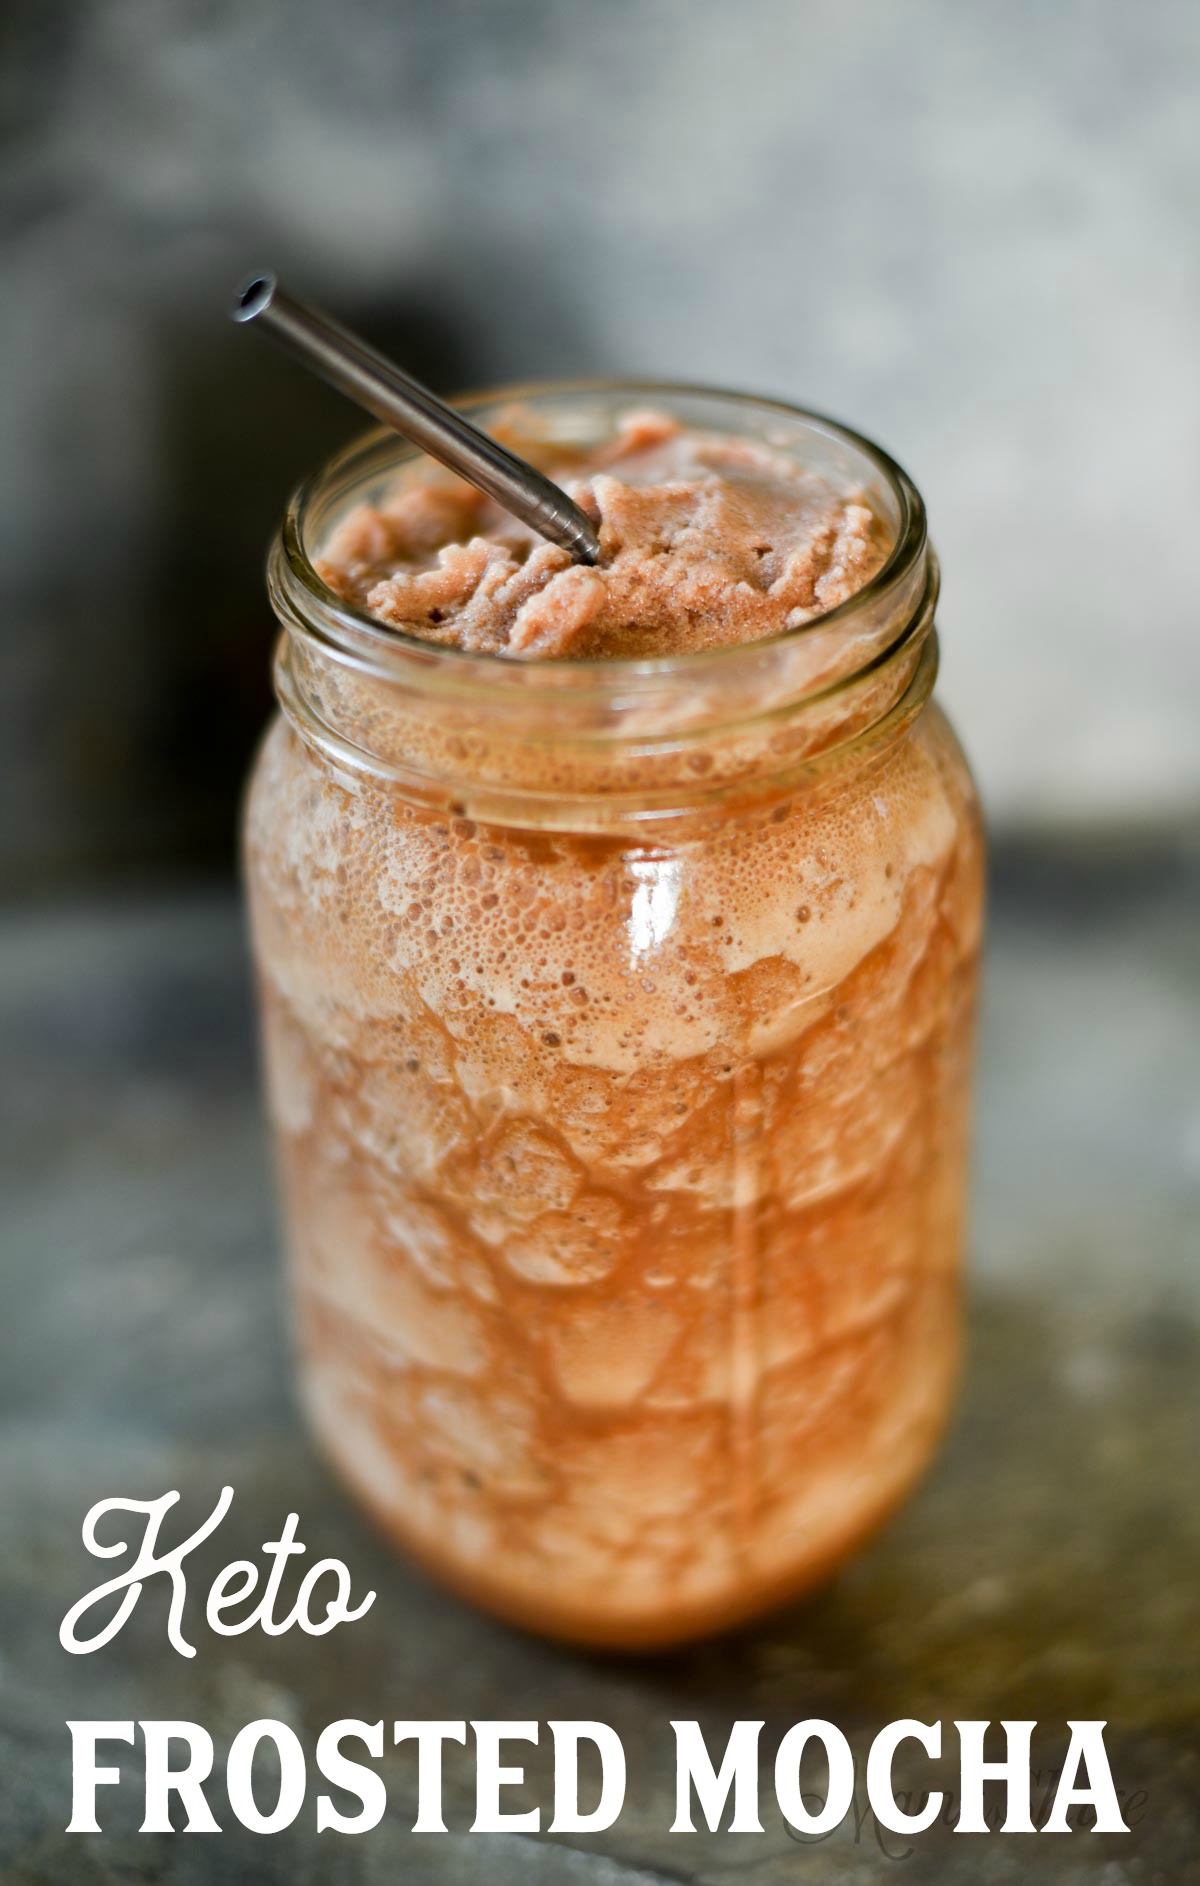 Delicious Frosted Mocha in ball jar with metal straw.